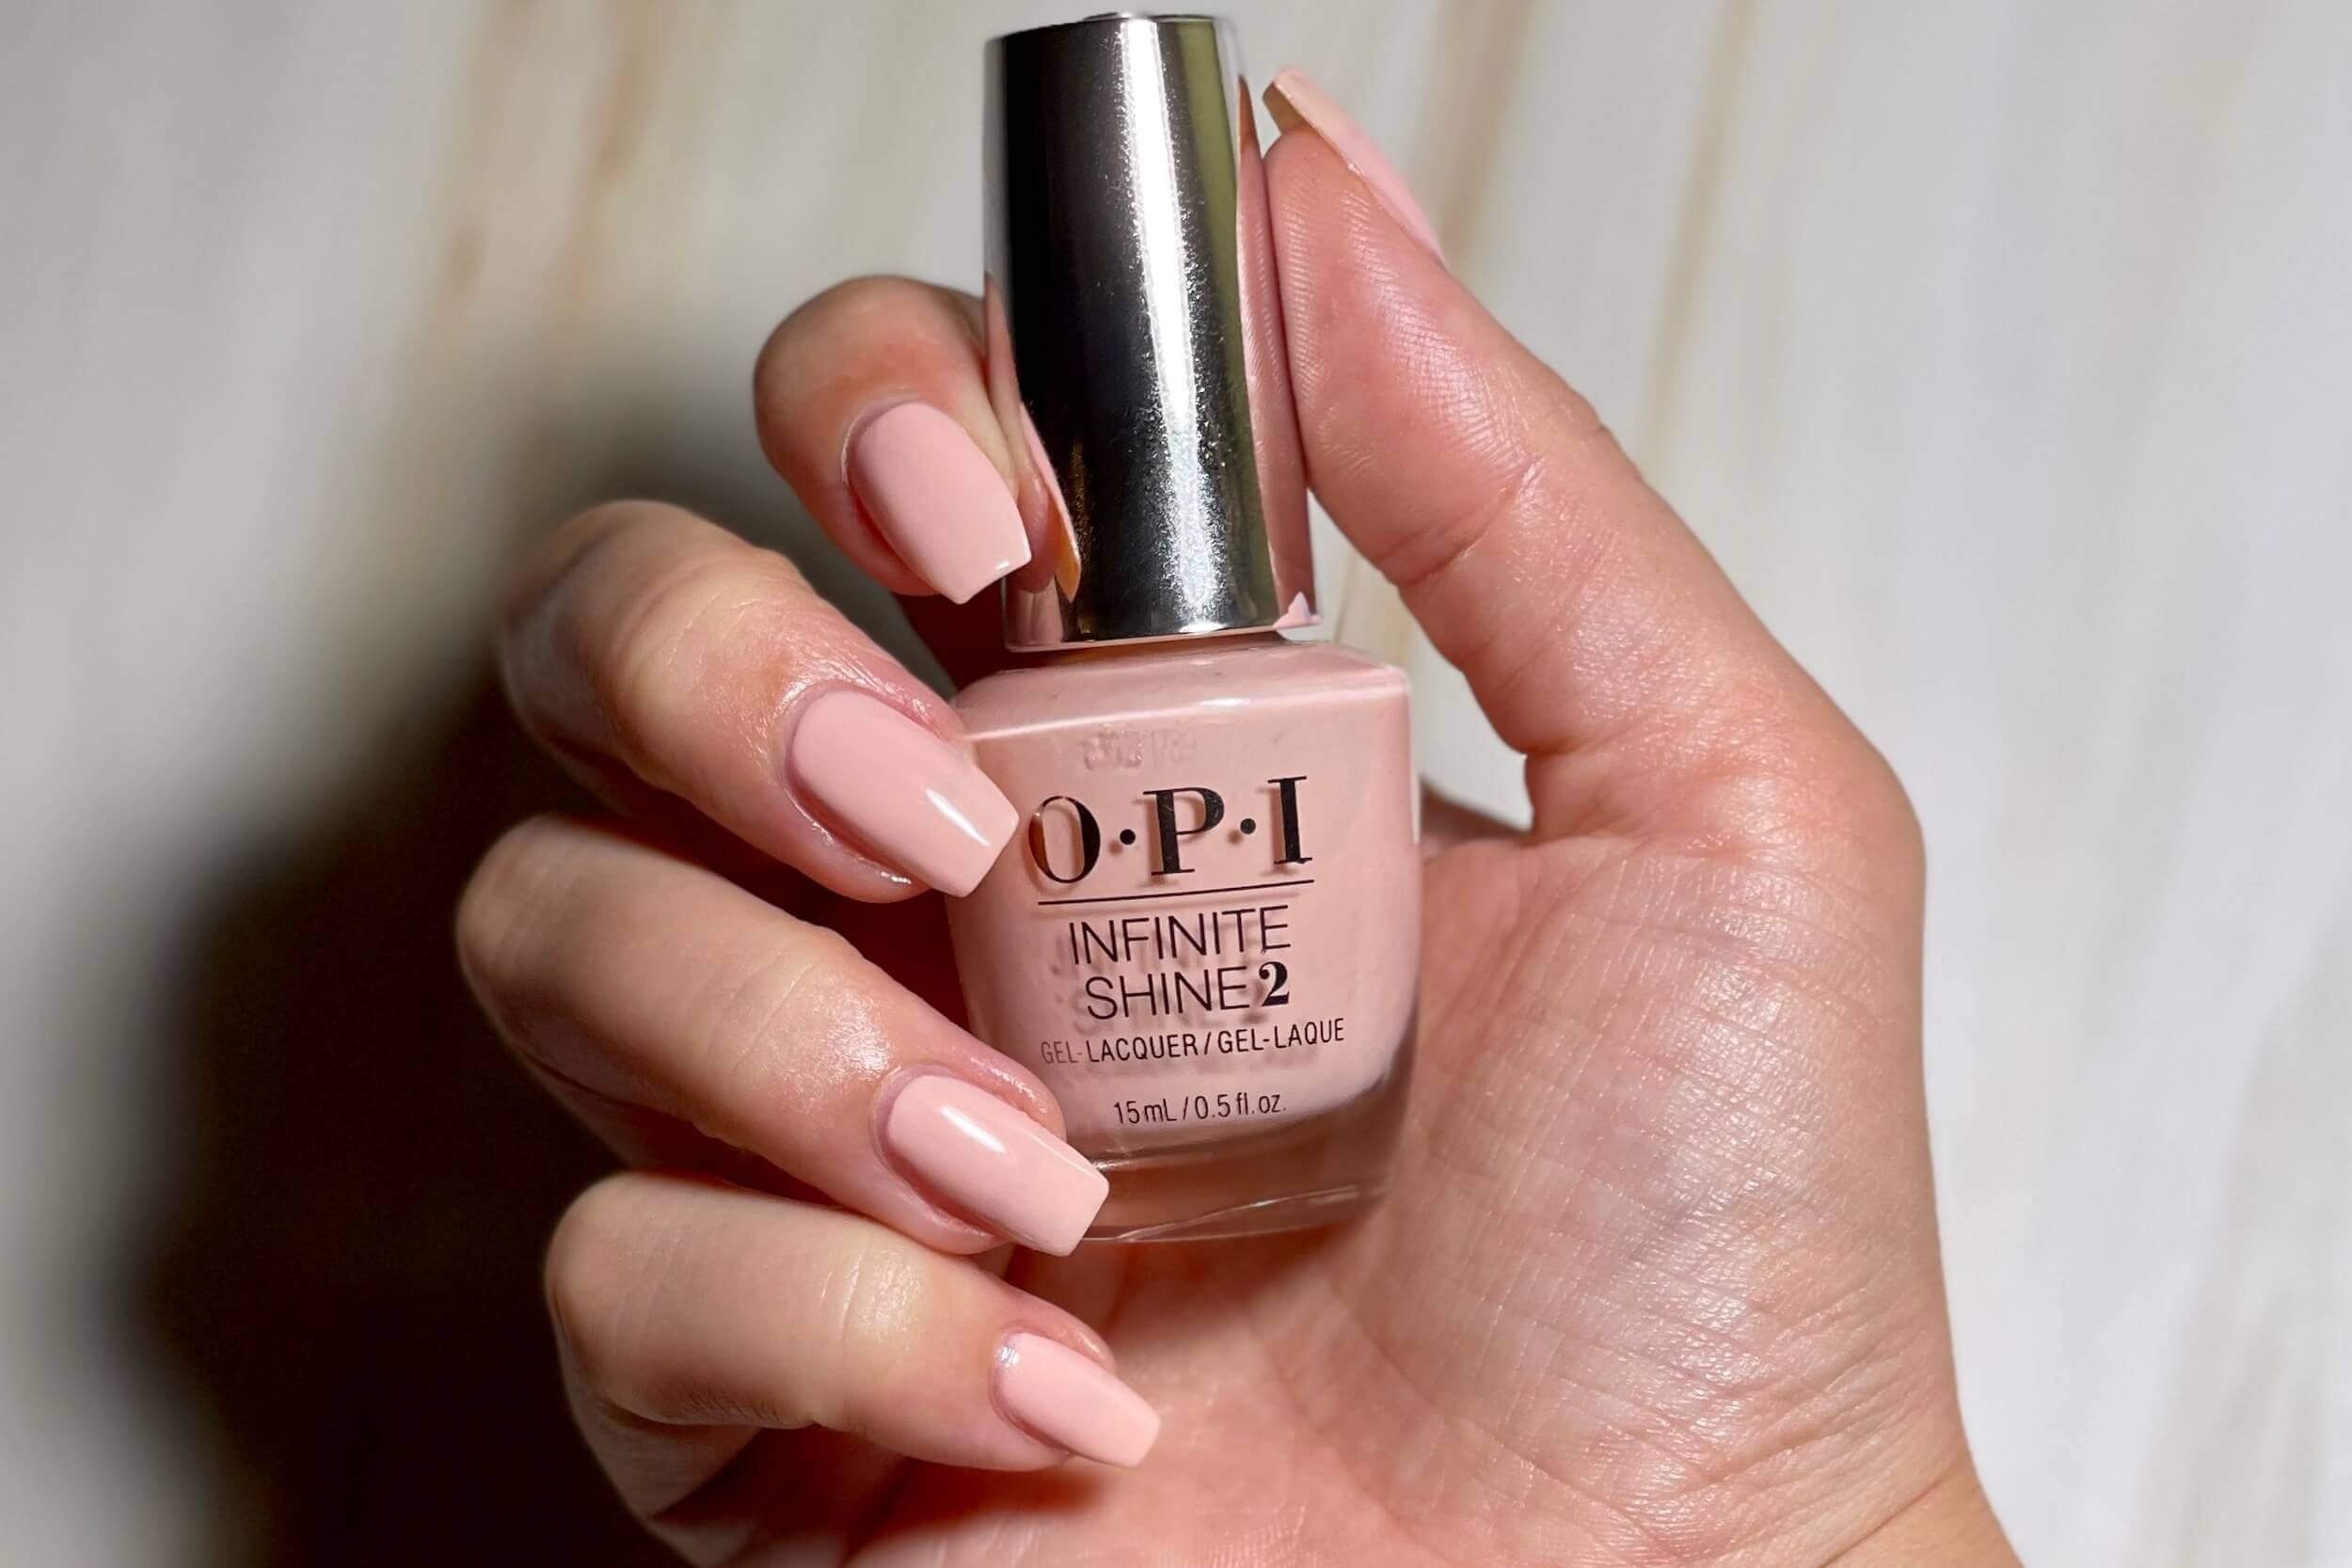 2. "Sweetheart" by OPI - wide 8